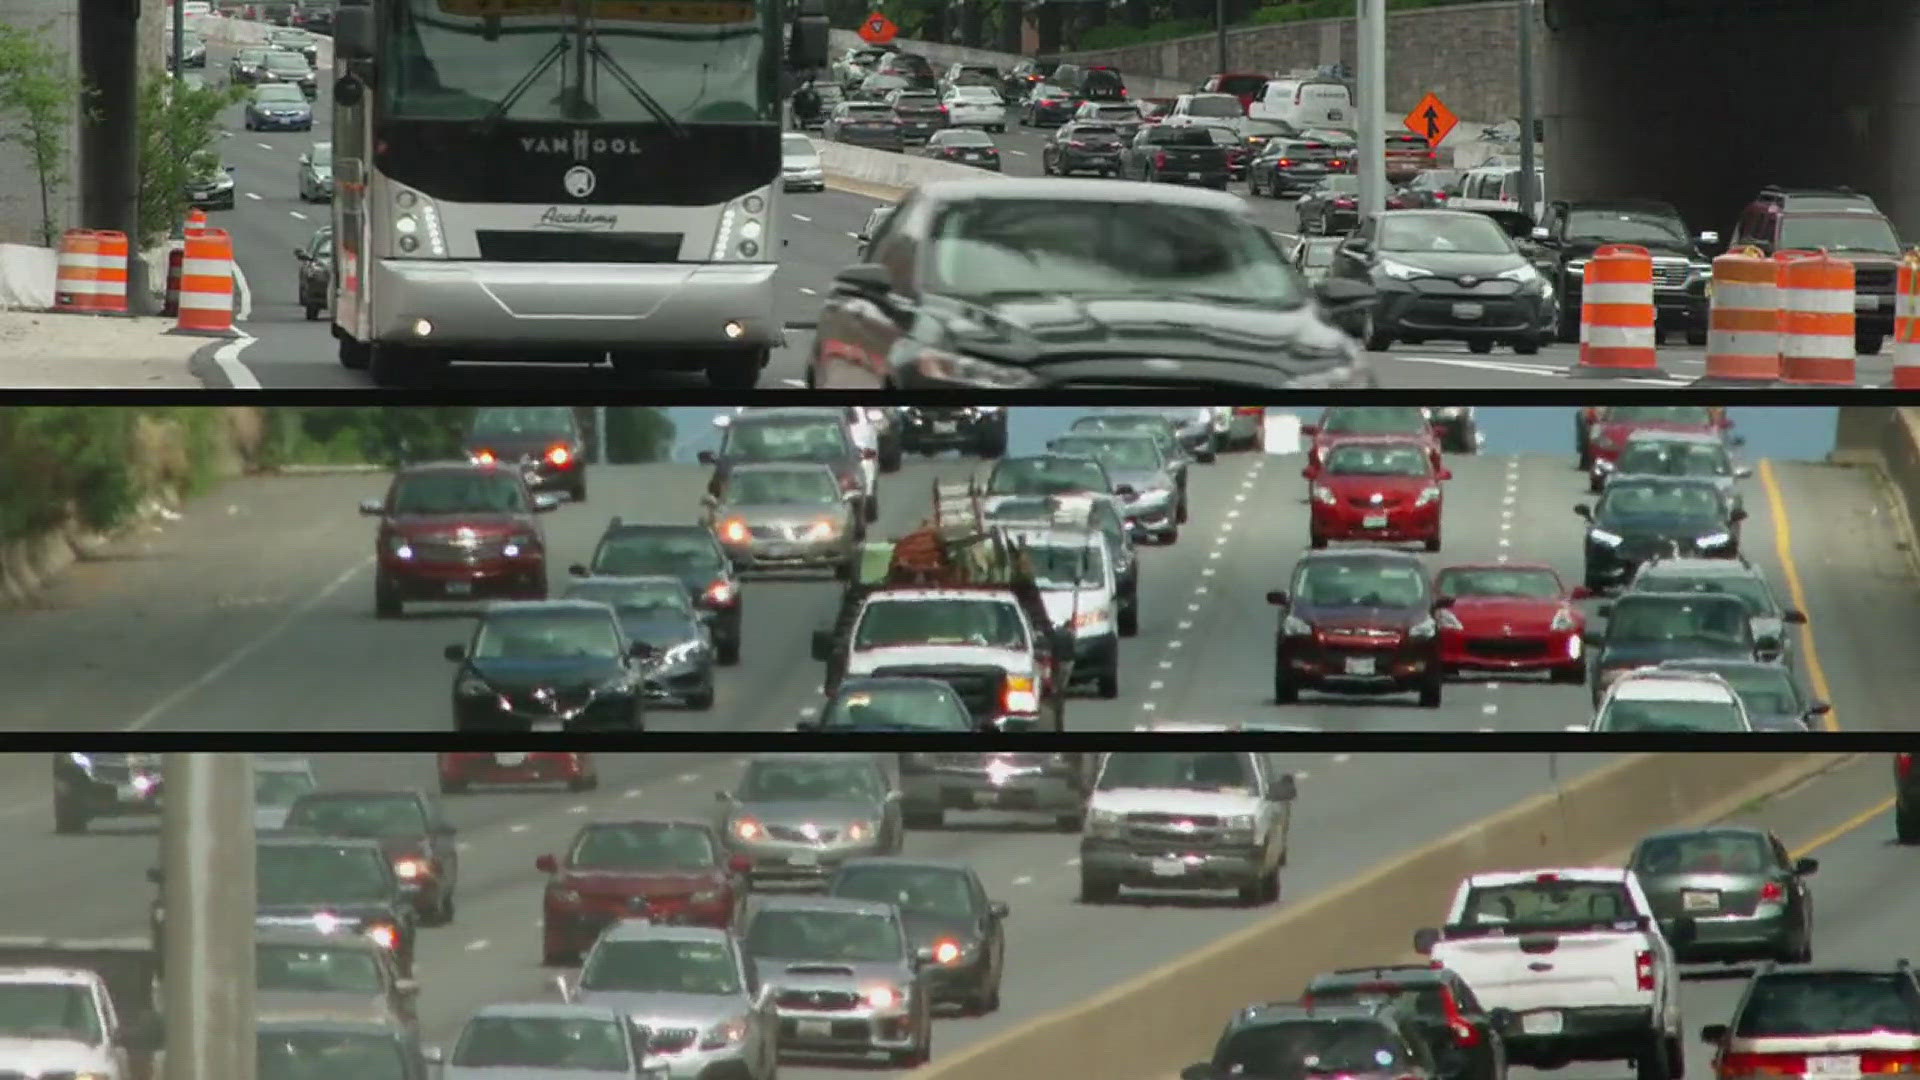 AAA estimates that 44 million will be traveling between Friday and Tuesday.